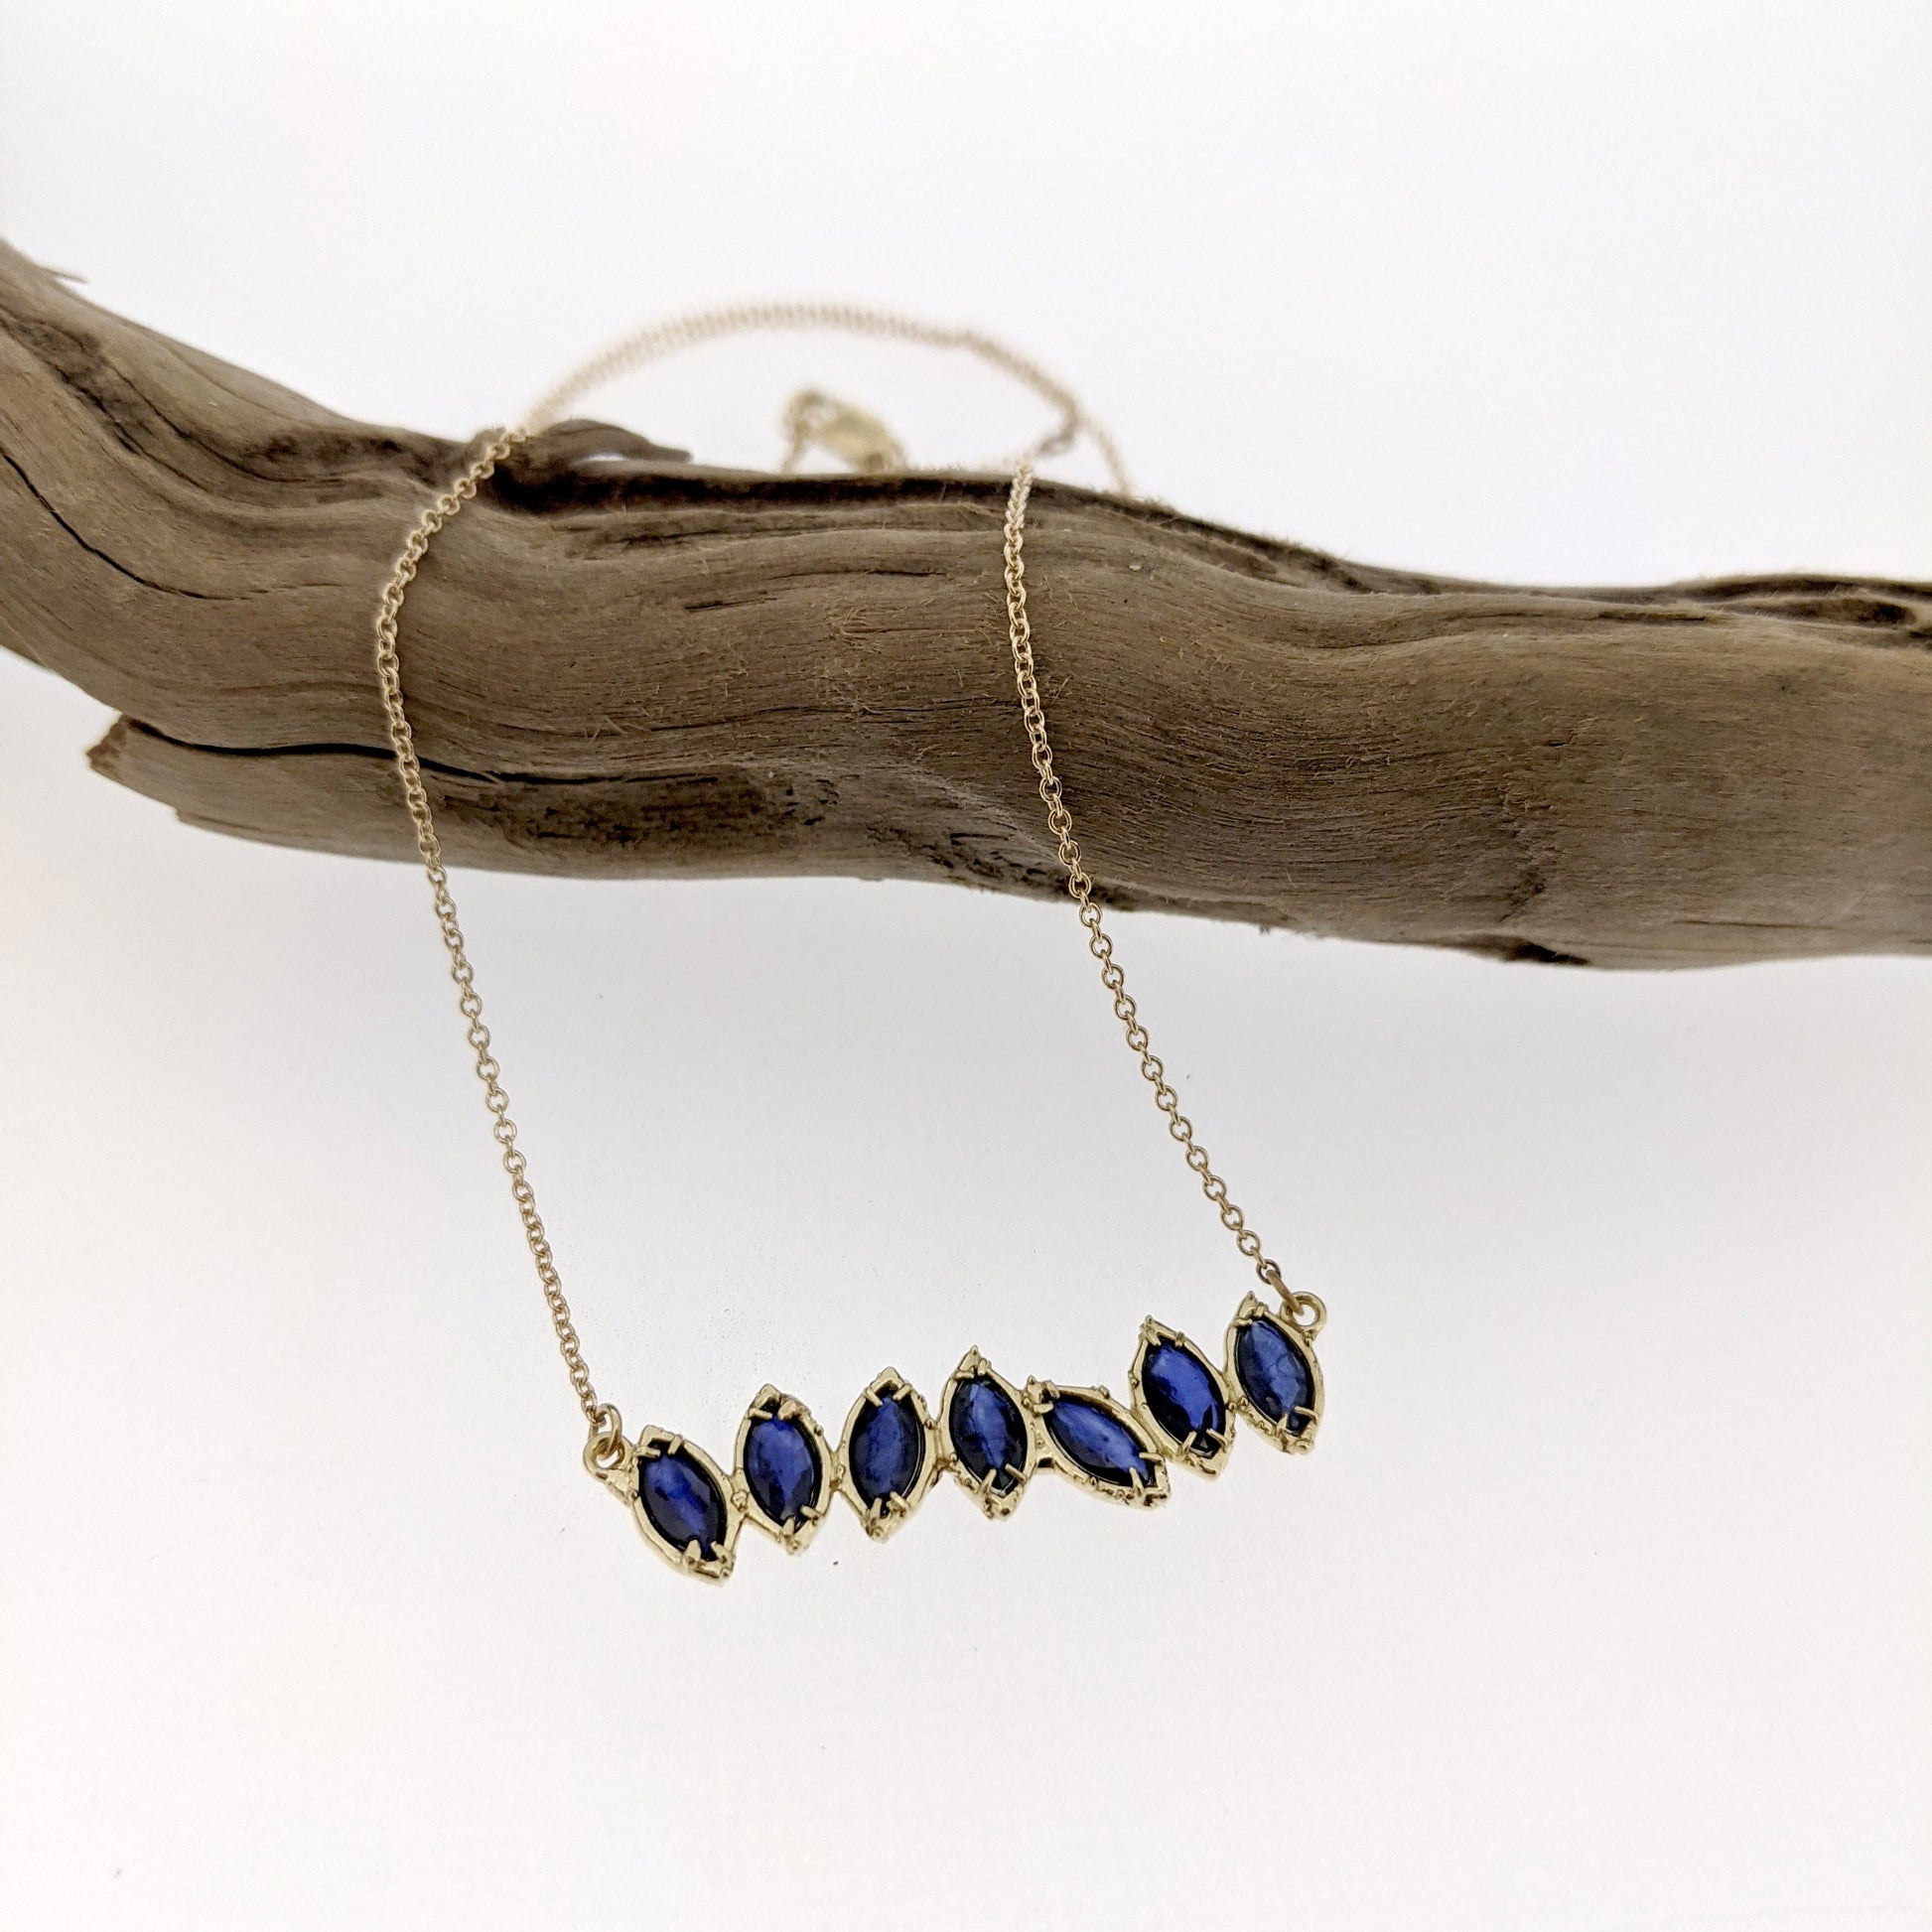 Full view of Sapphire Cherin Necklace draped over stick.